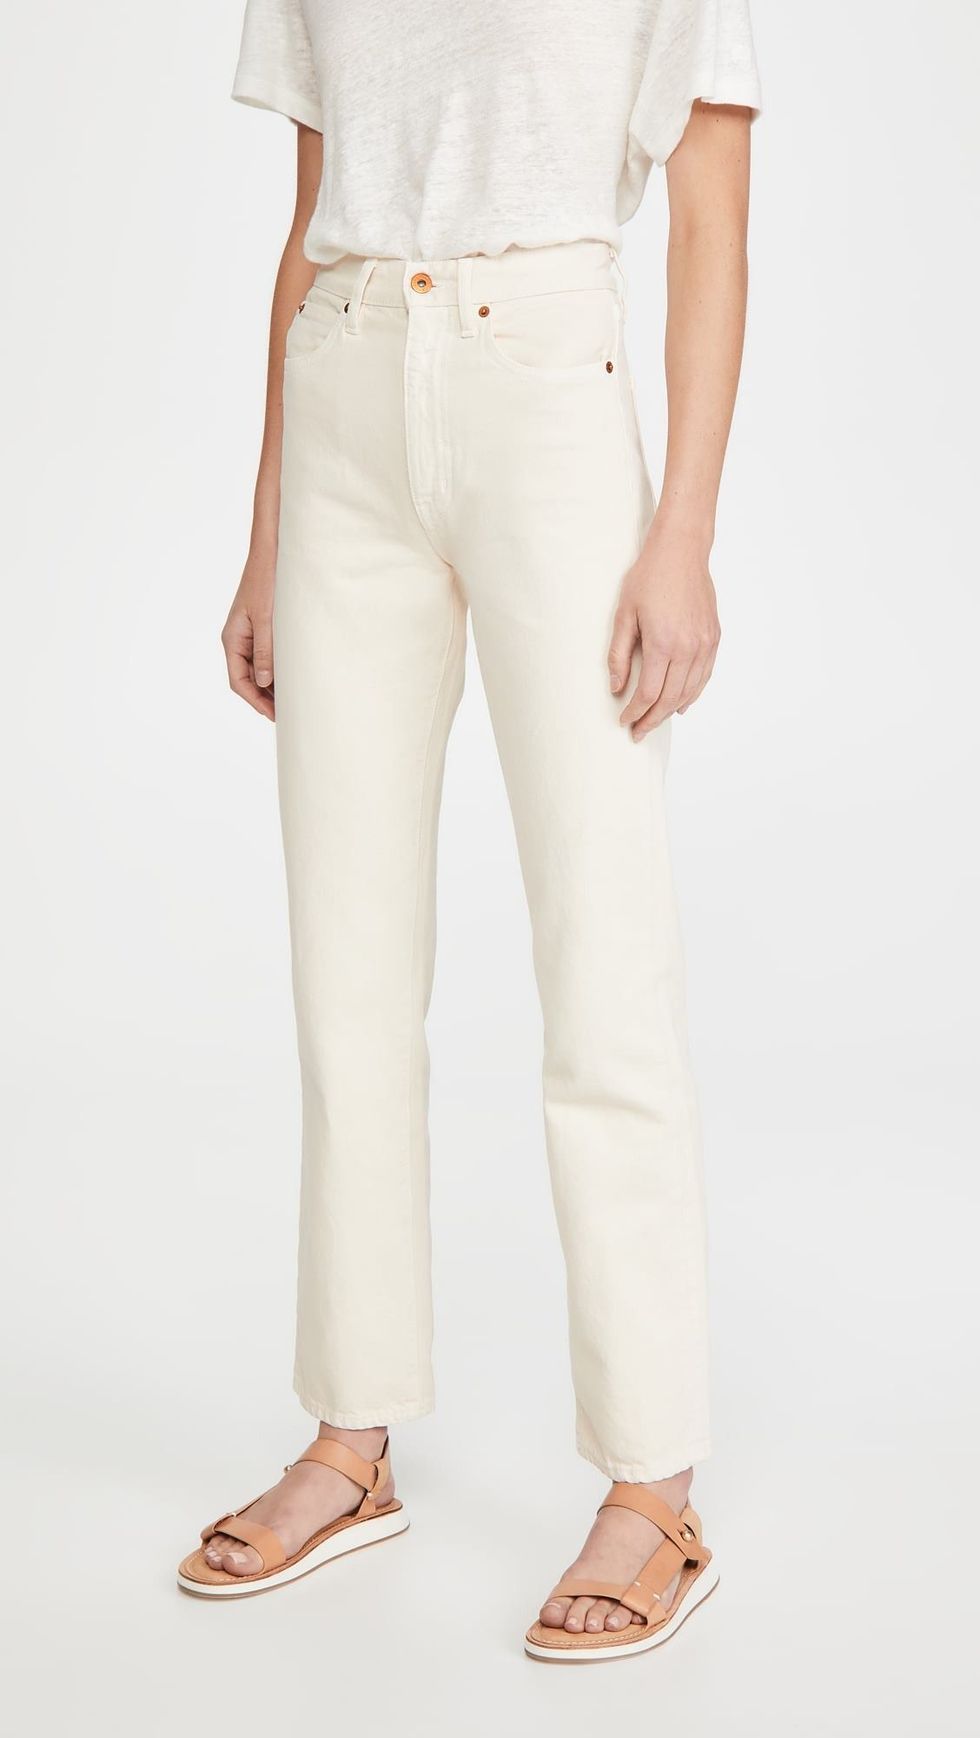 The Best-Rated White Jeans For Women in 2021